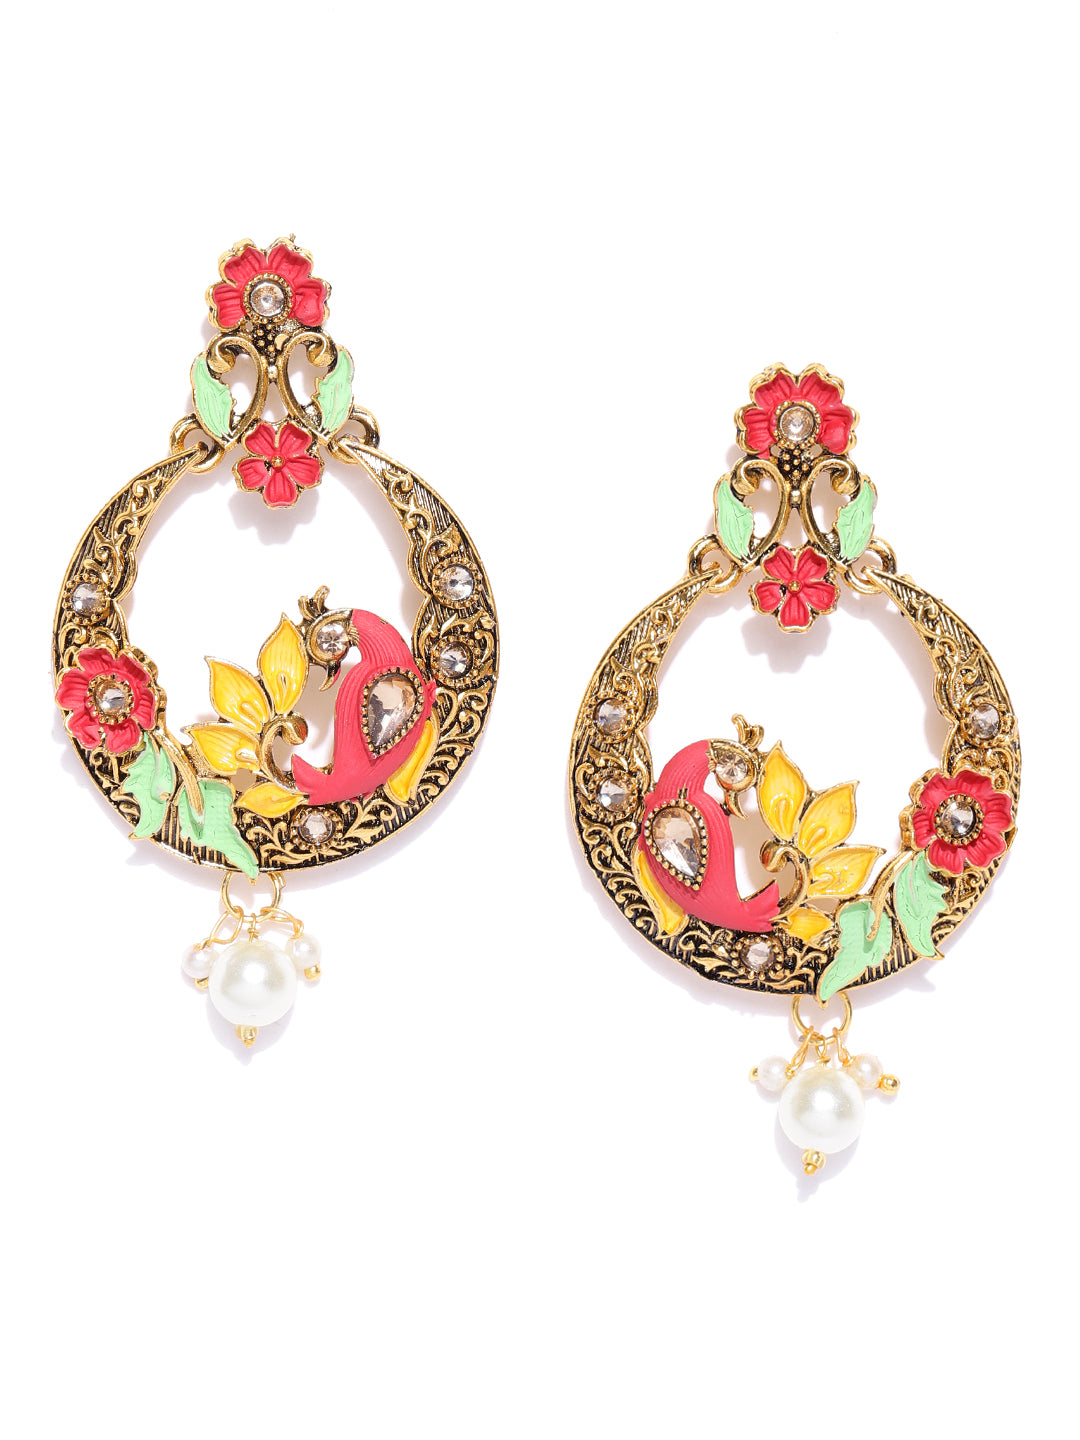 Gold-Plated Peacock Inspired Chandbali Earrings with Meenakari work in Red And Green Color